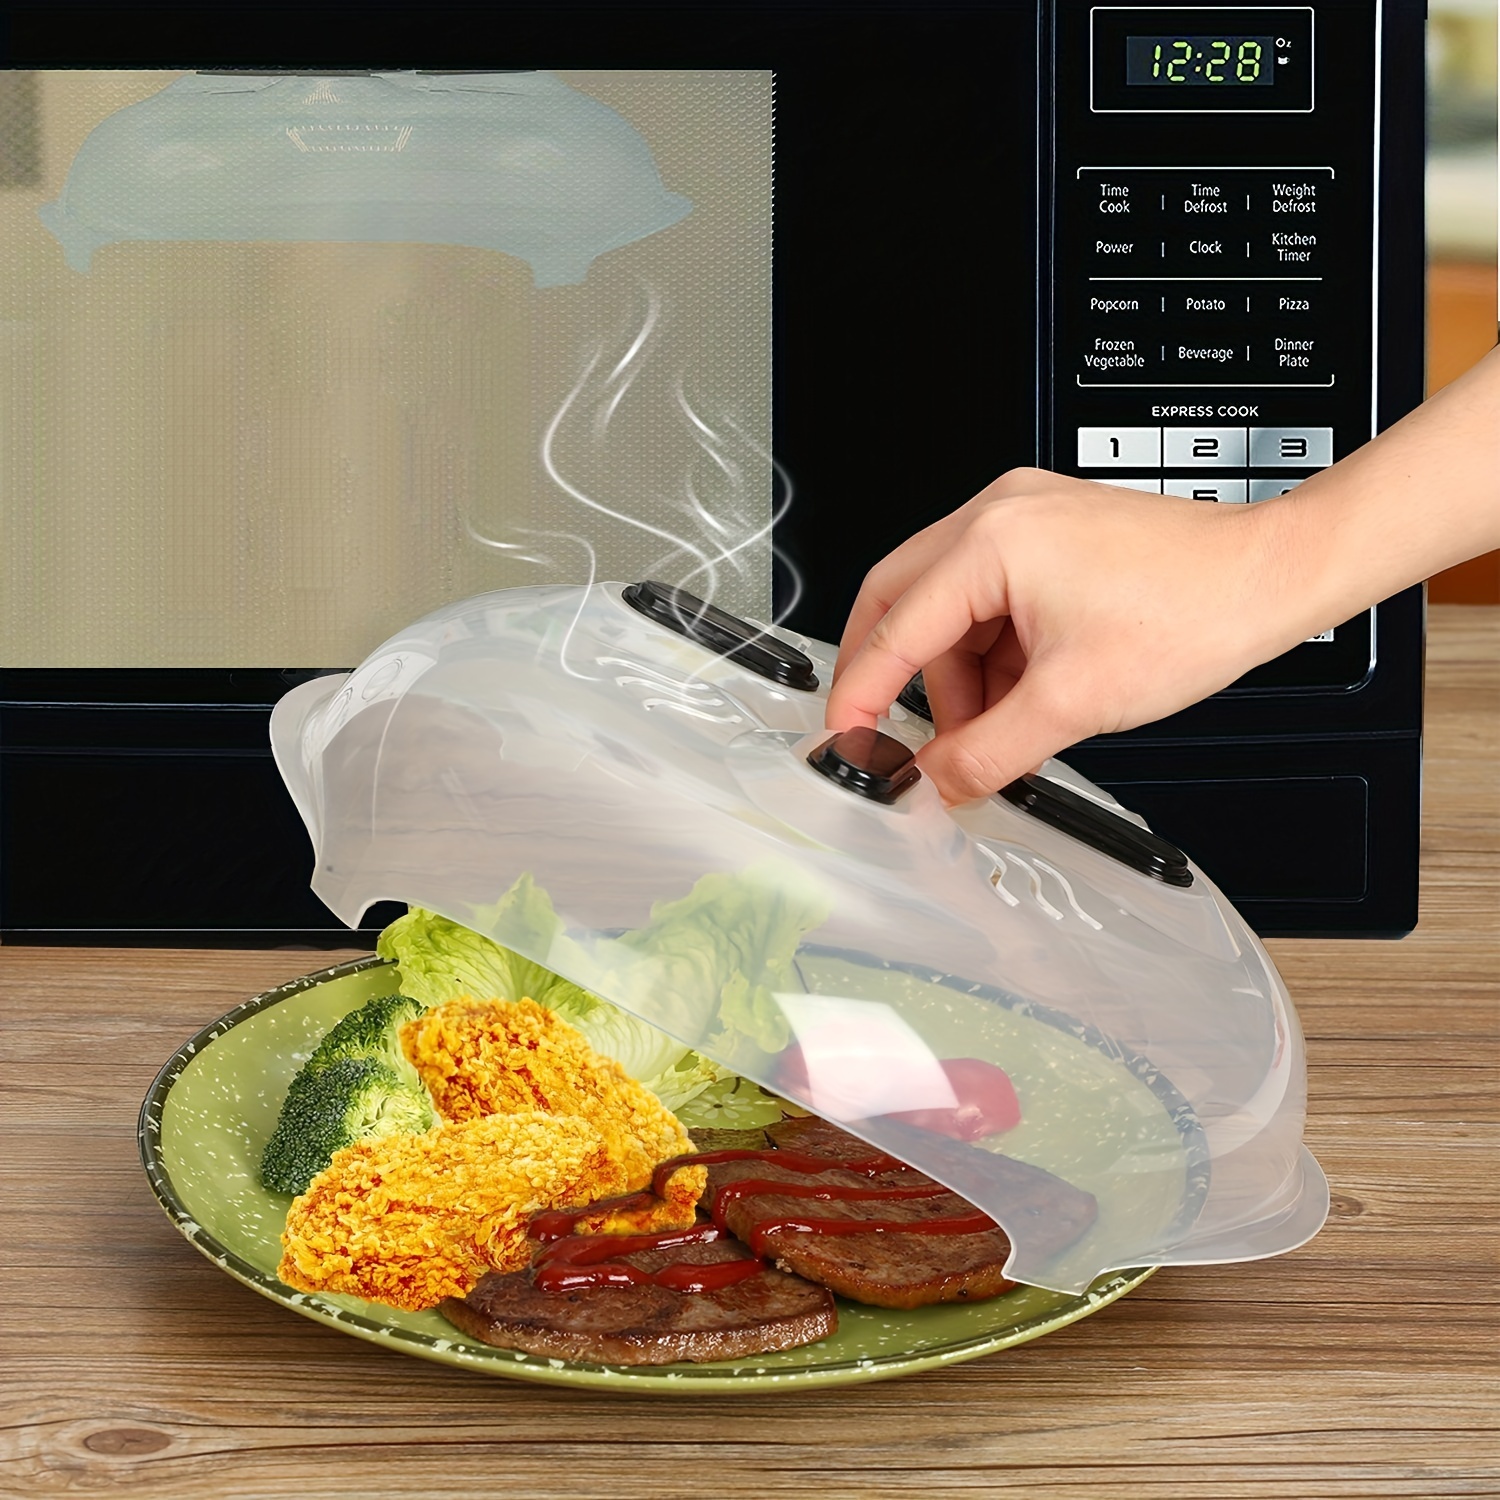 Microwave Cover for Food, Clear Microwave Splatter Cover with